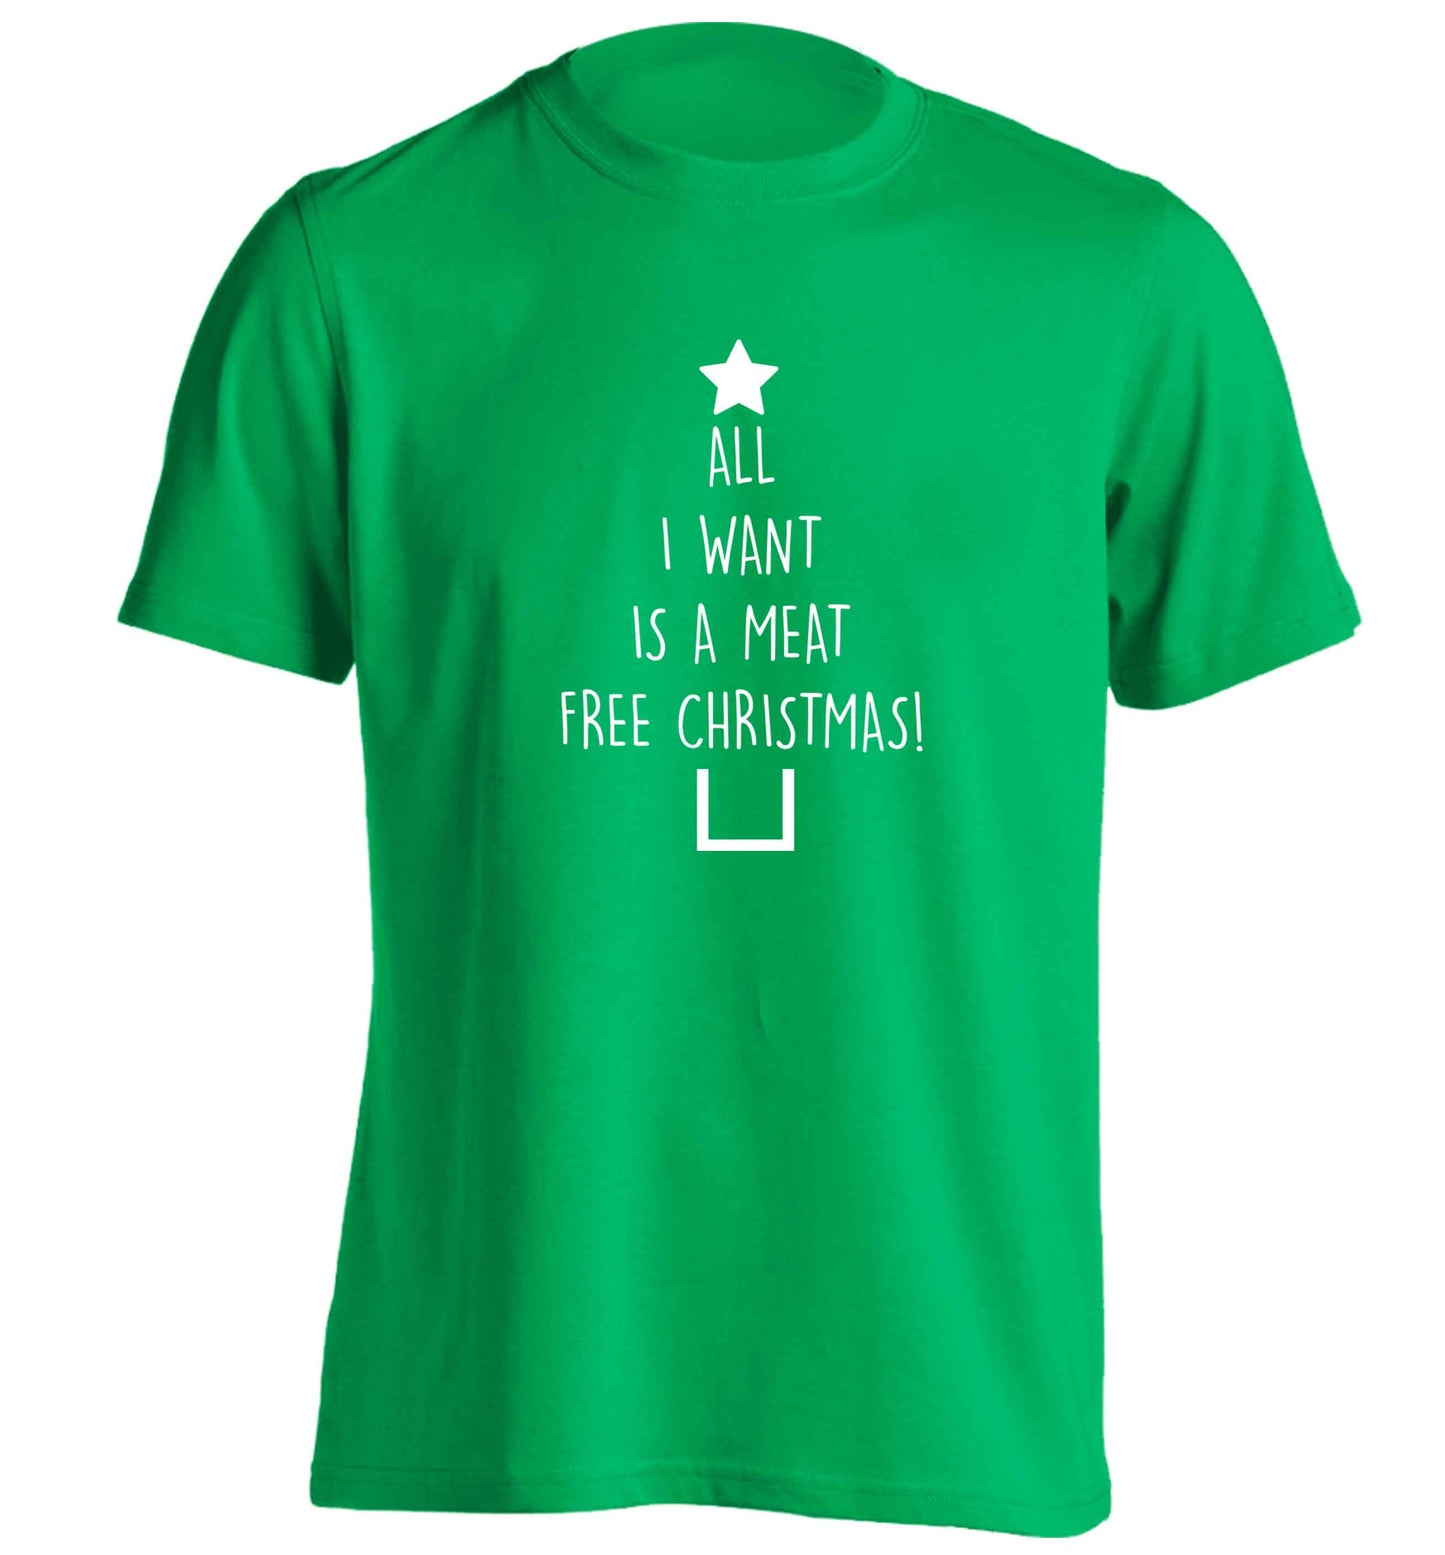 All I want is a meat free Christmas adults unisex green Tshirt 2XL